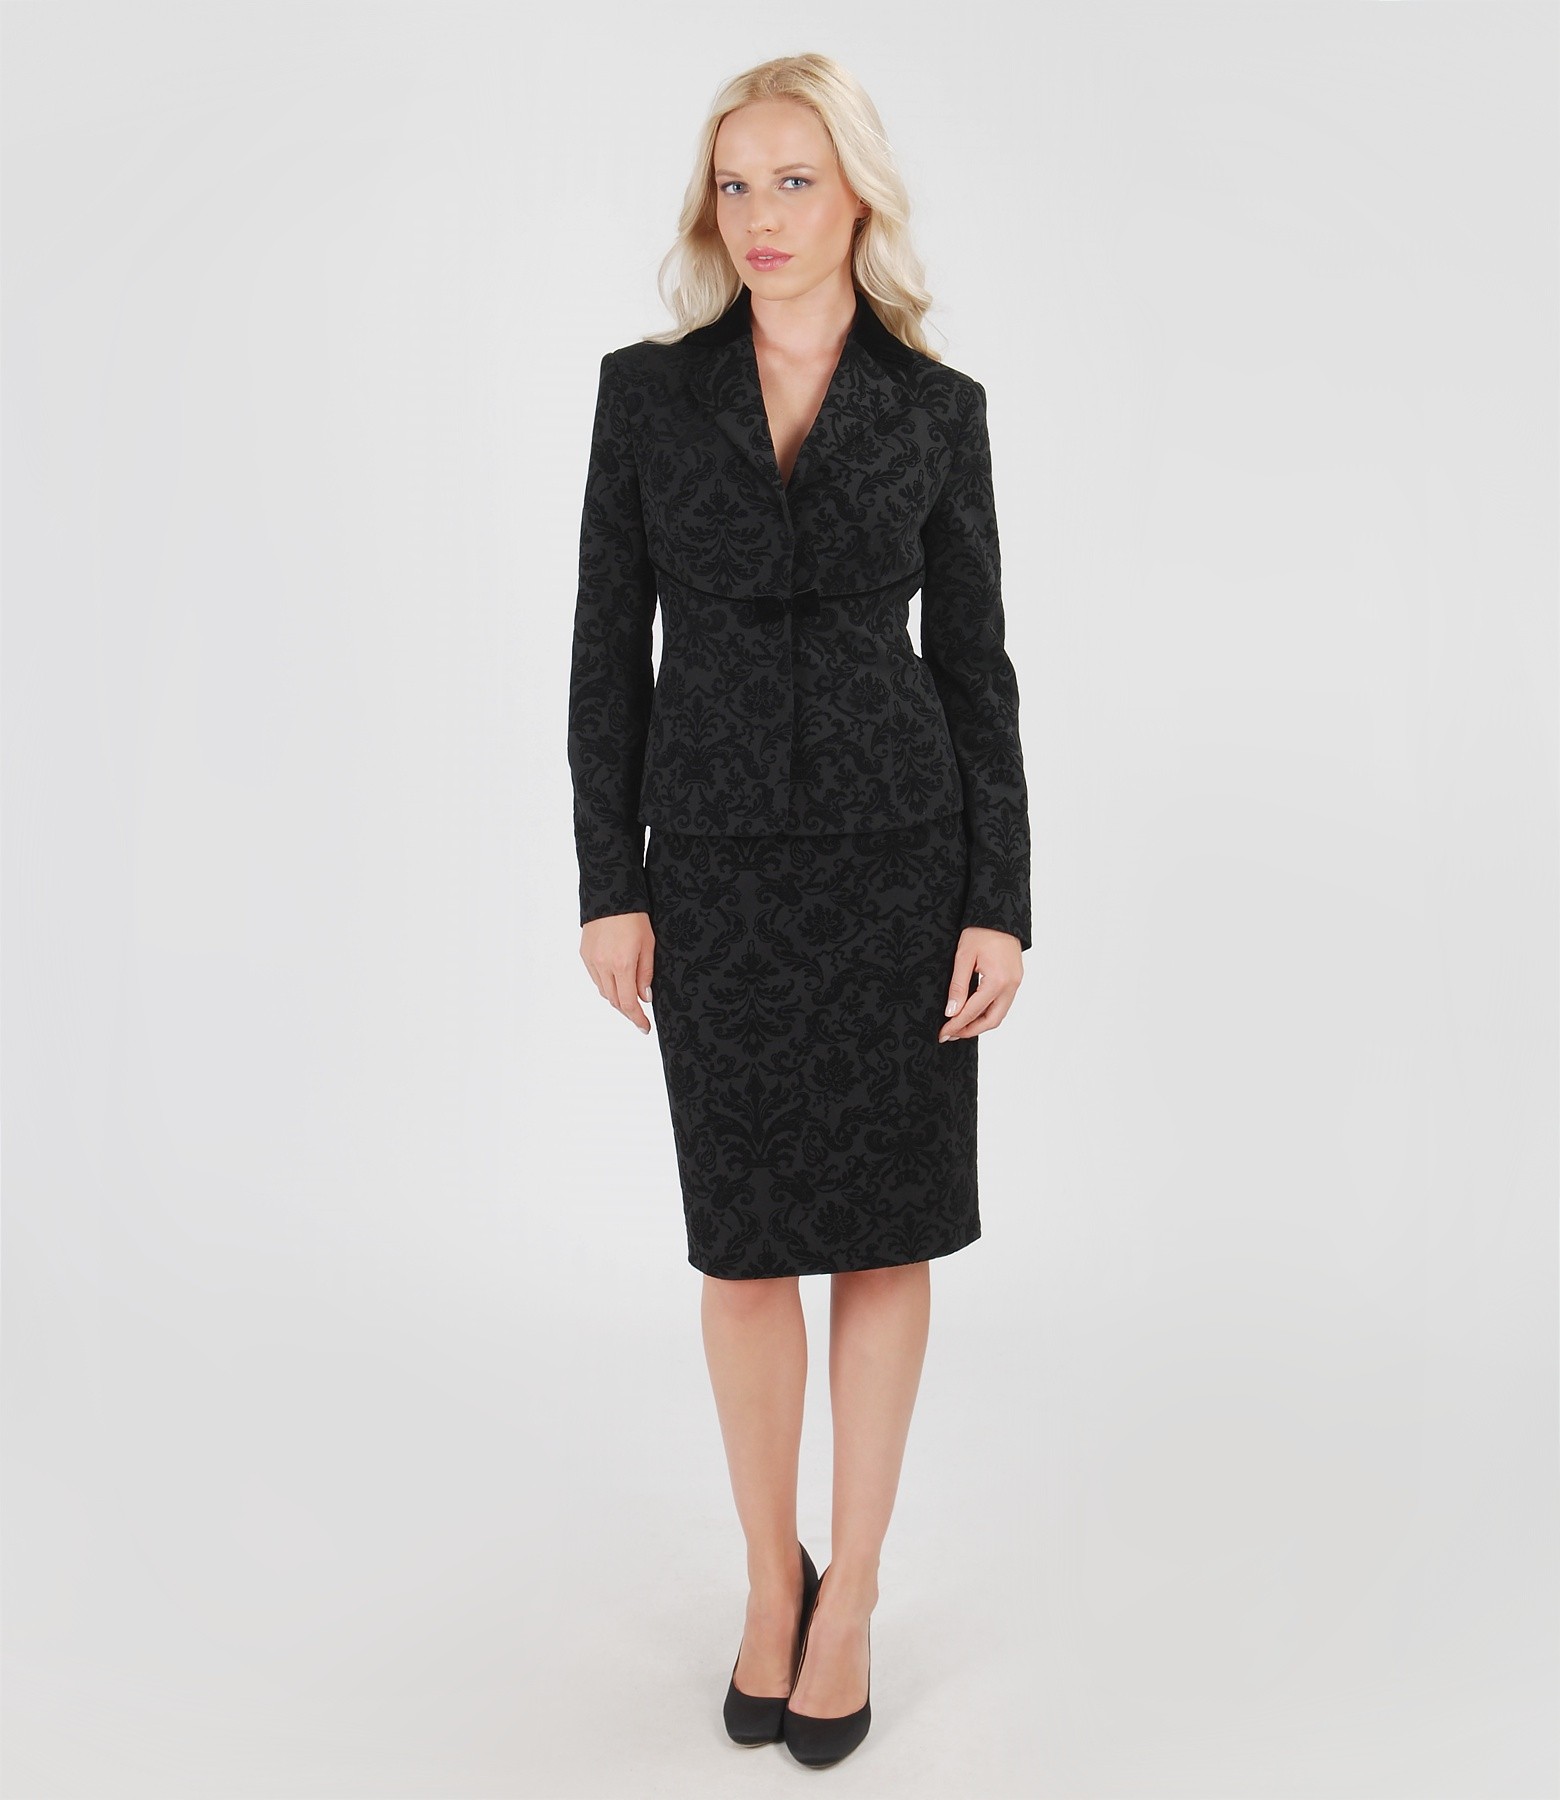 Office outfit from elastic fabric with velvet - YOKKO